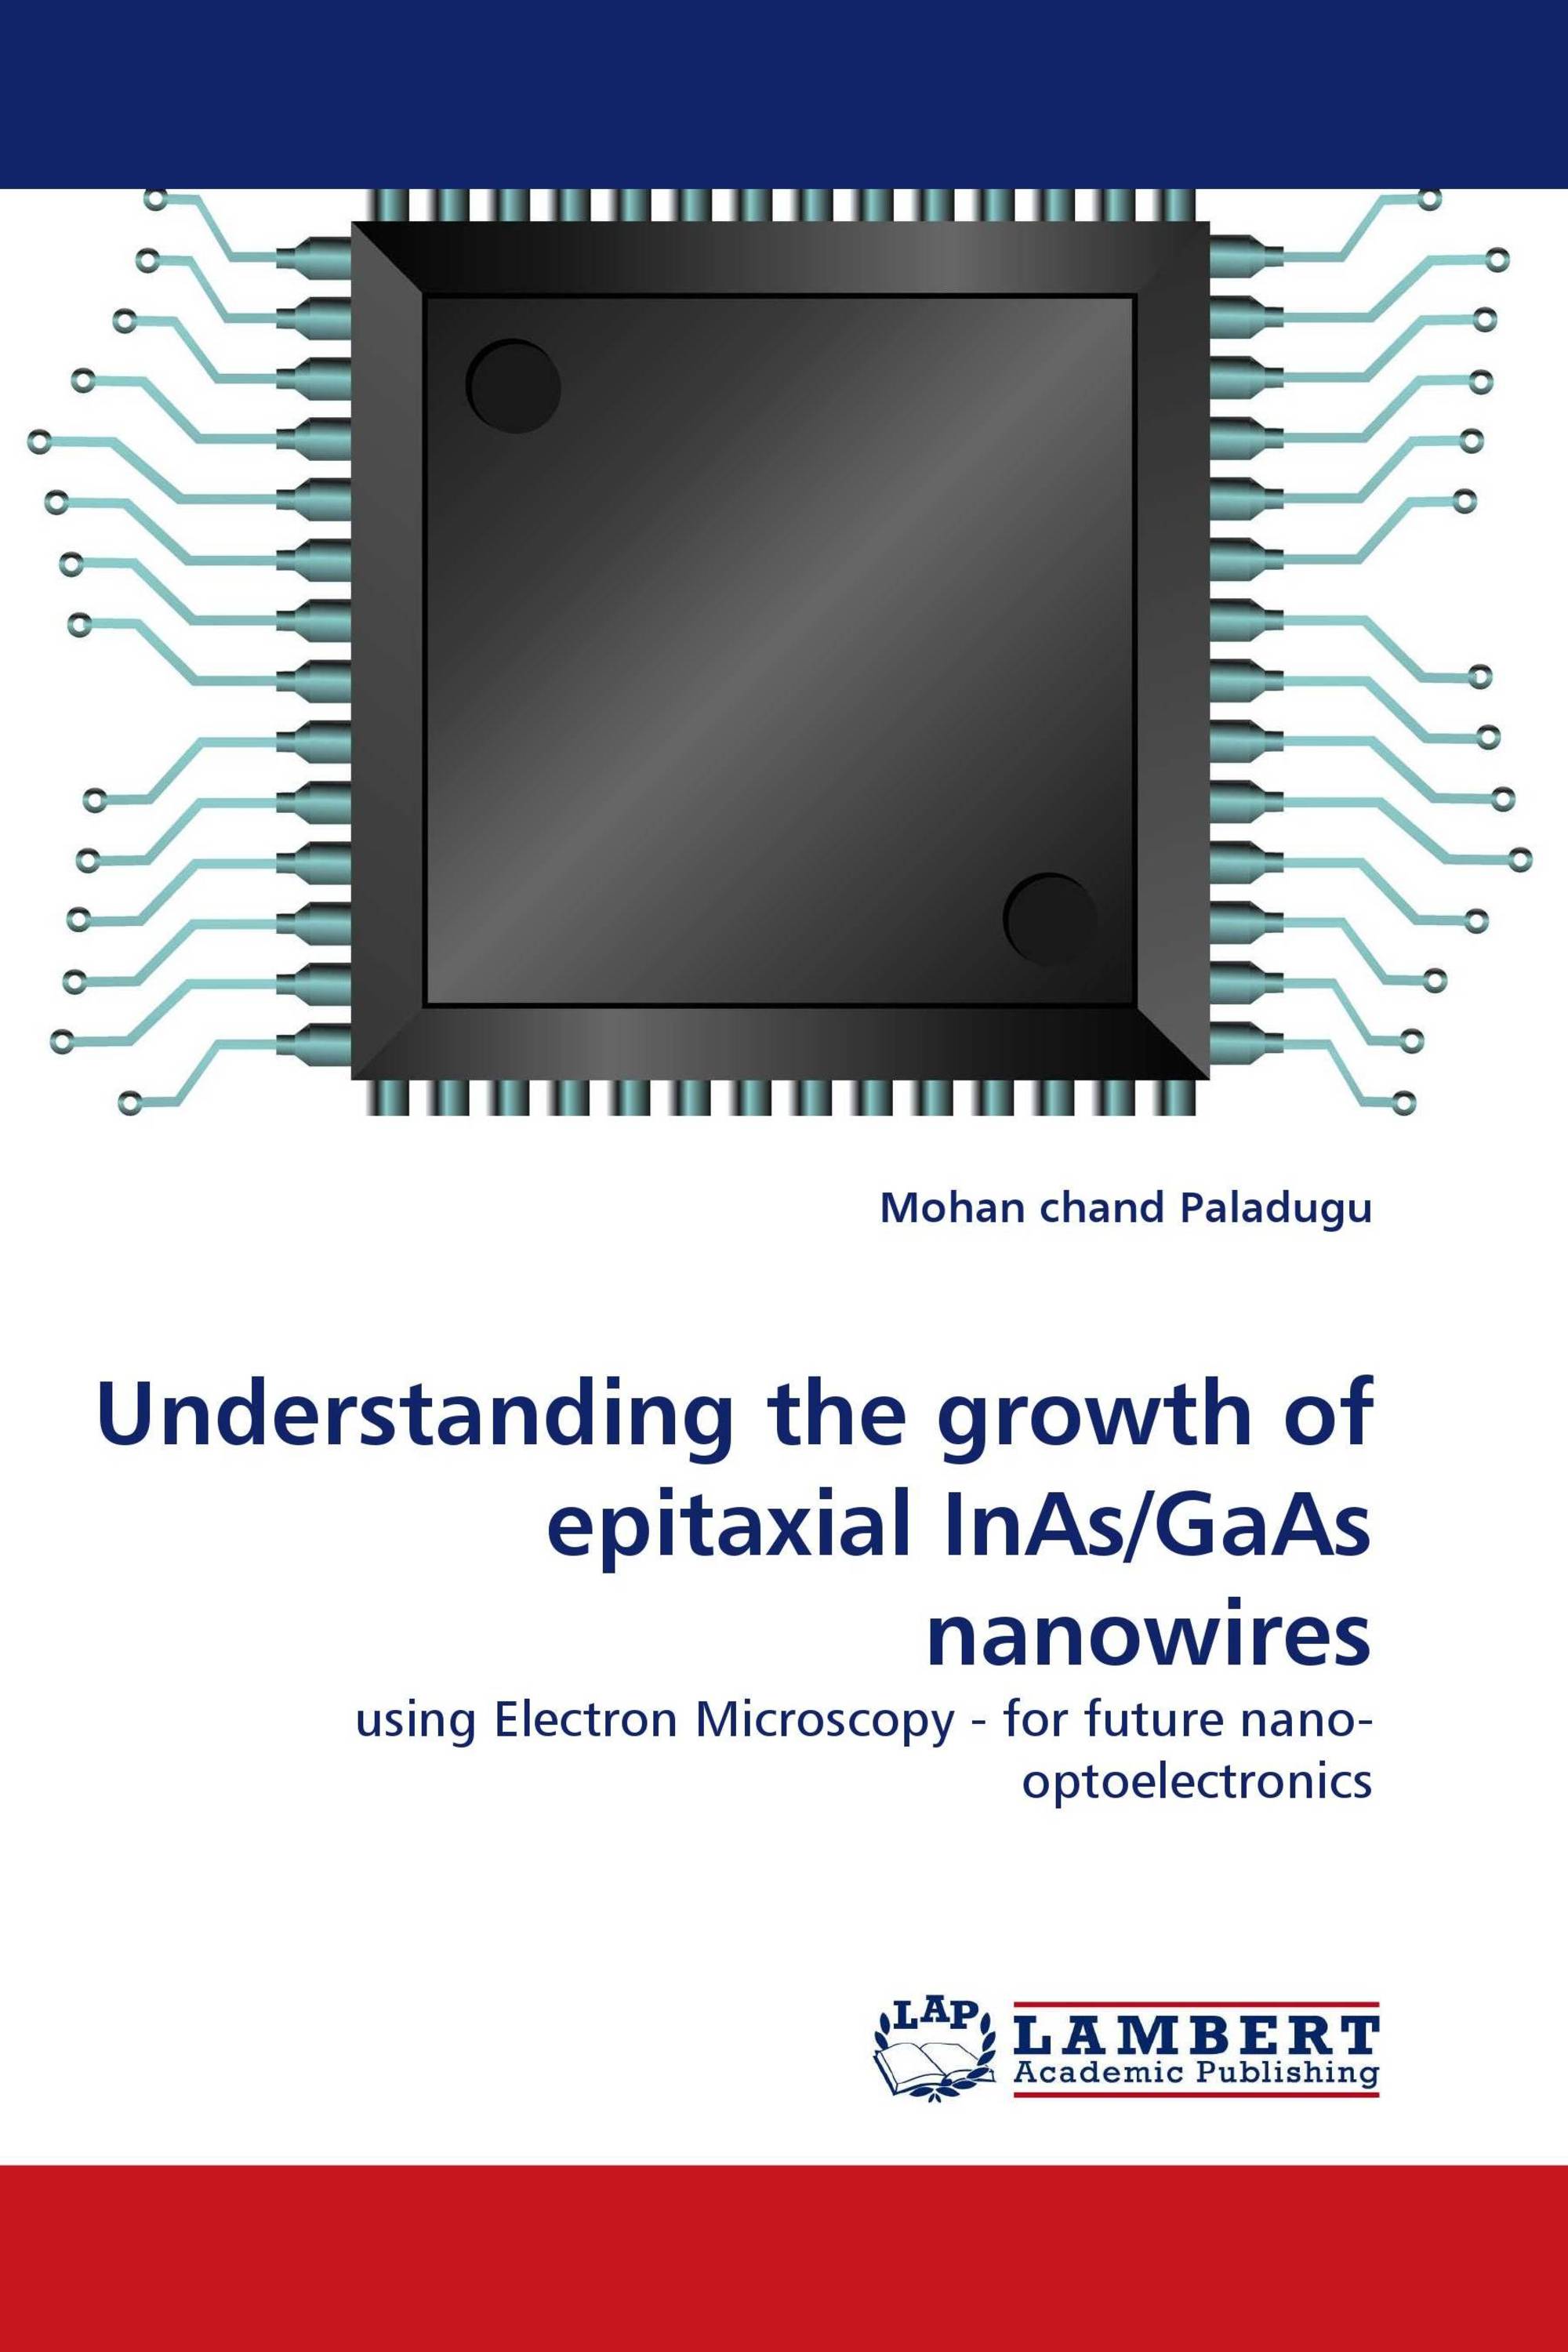 Understanding the growth of epitaxial InAs/GaAs nanowires